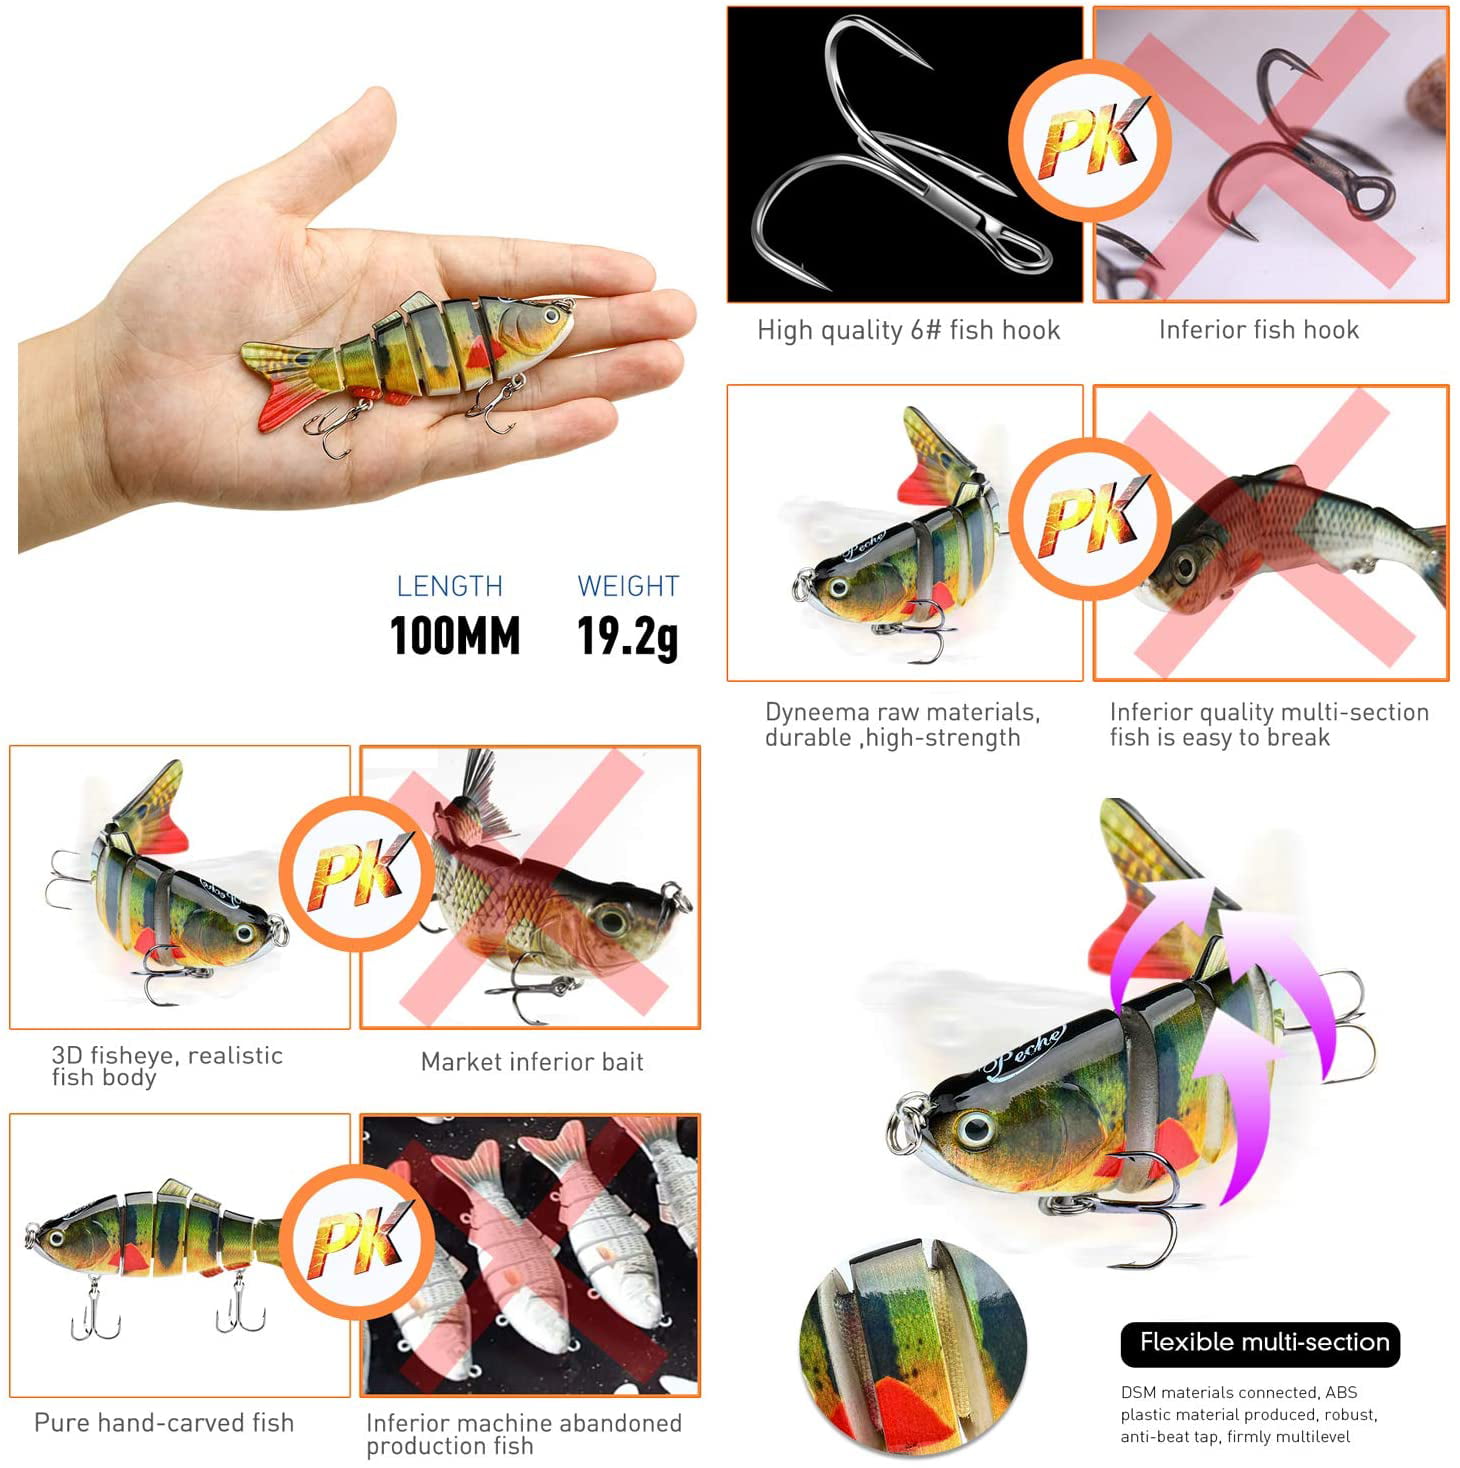 Squid Lures | Trout Fishing Lures with Fishing Tool Kit | Lifelike 3D  Holographic Eyes Fly Fishing Accessories for Salmon Trout Bass Higyee